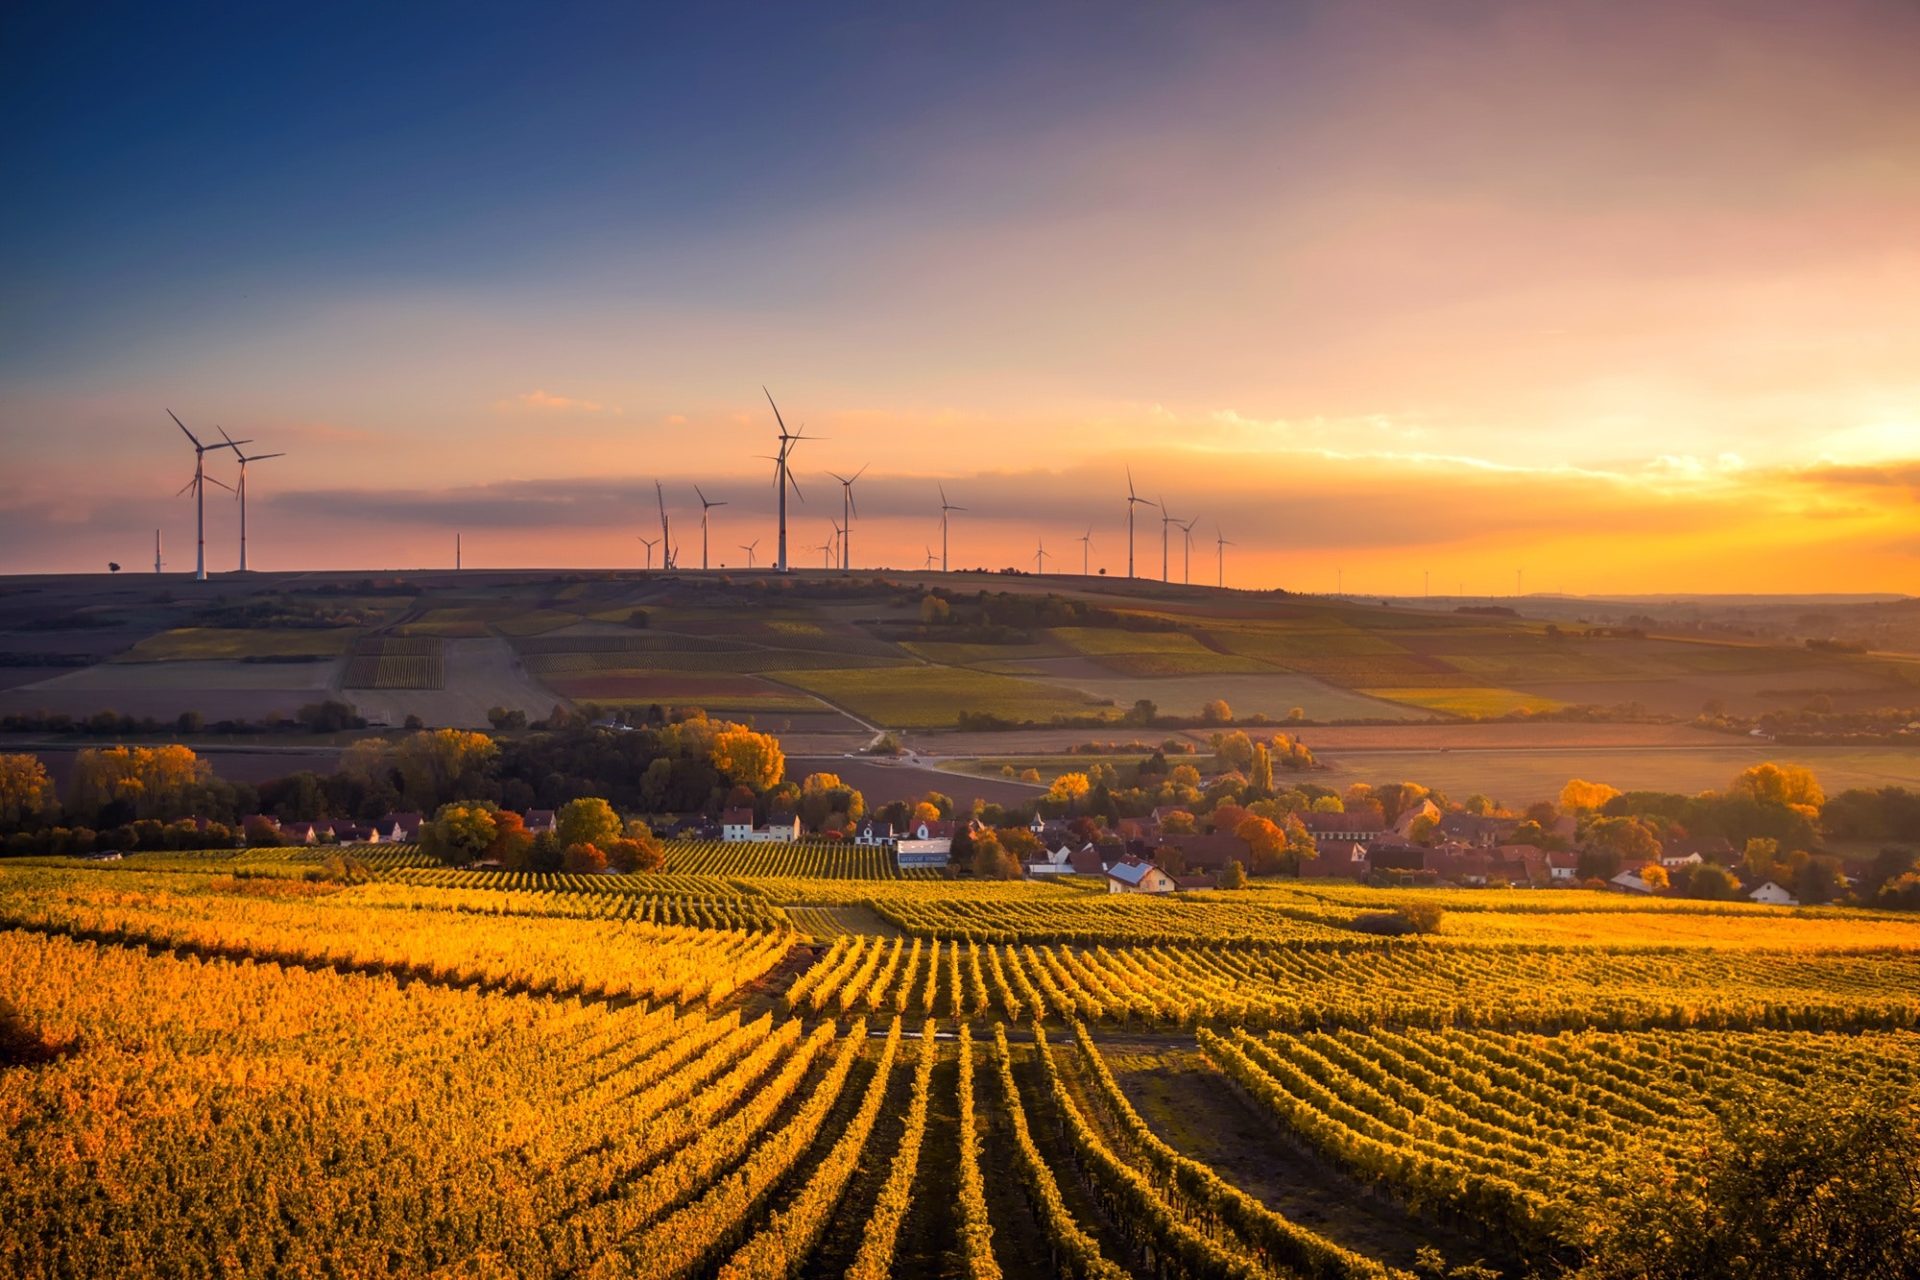 Global Studies and Sustainability - fields and wind turbines in countryside